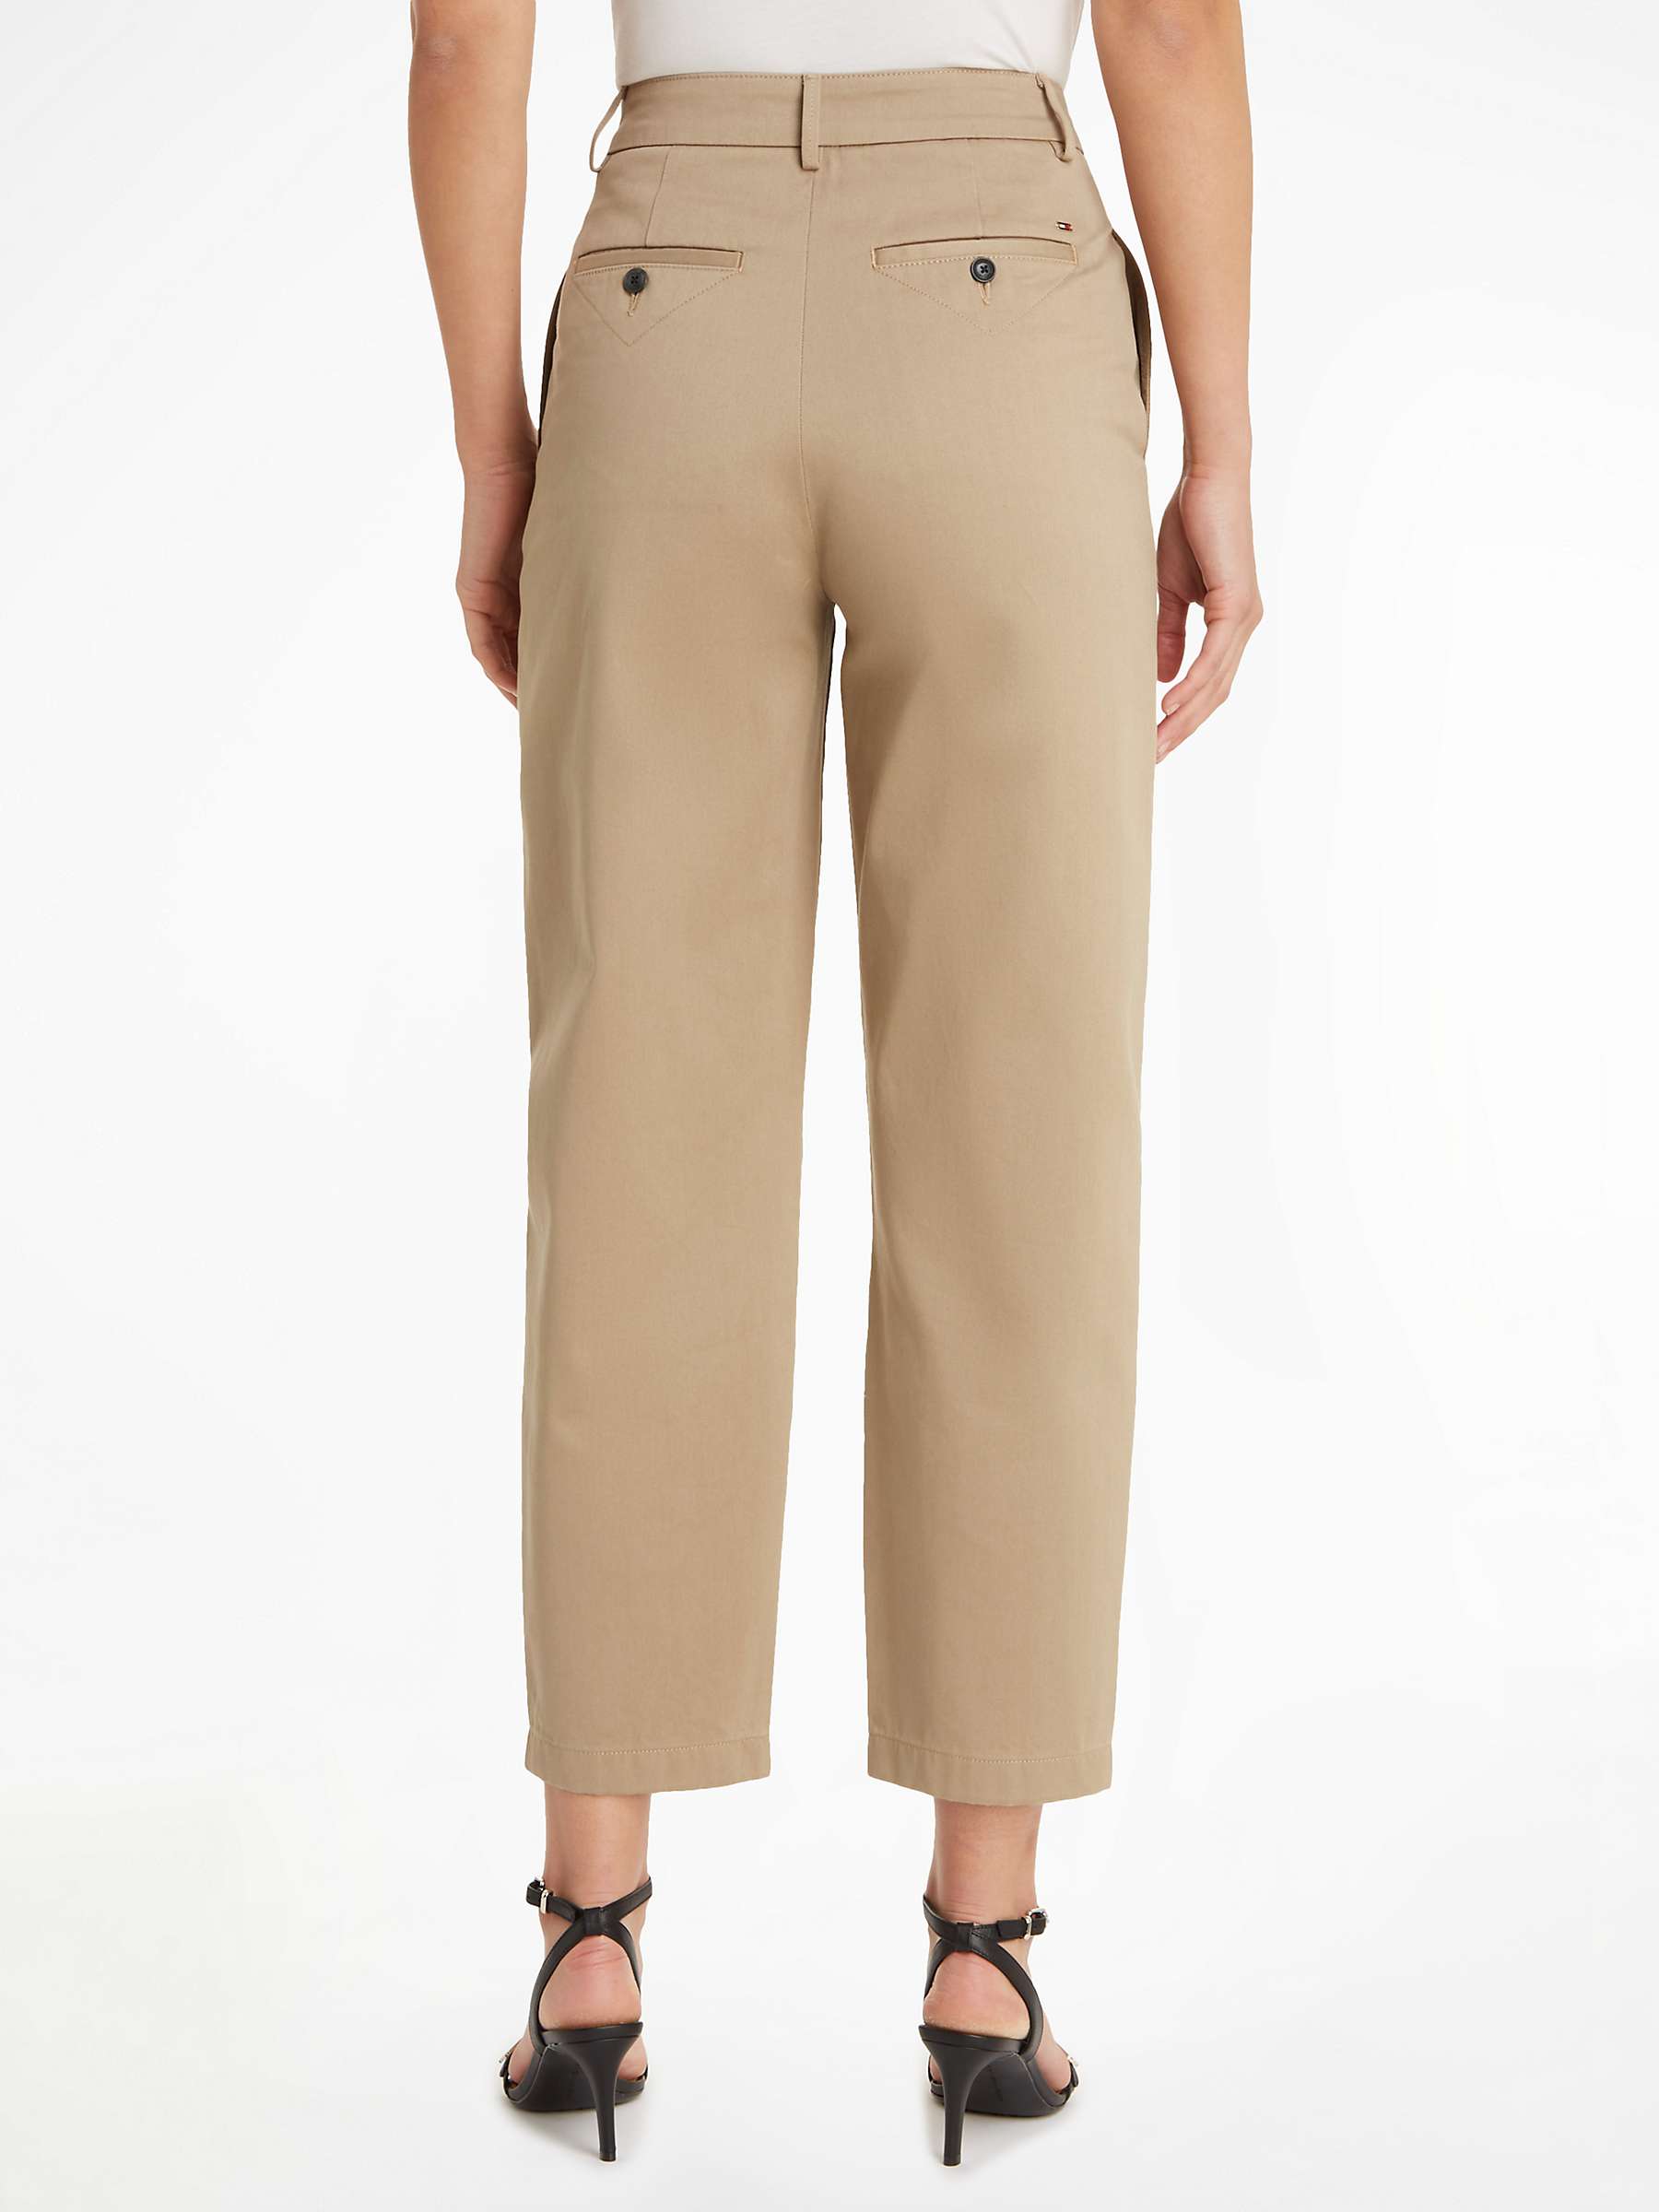 Buy Tommy Hilfiger Casual Chino Organic Cotton Trousers, Beige Online at johnlewis.com